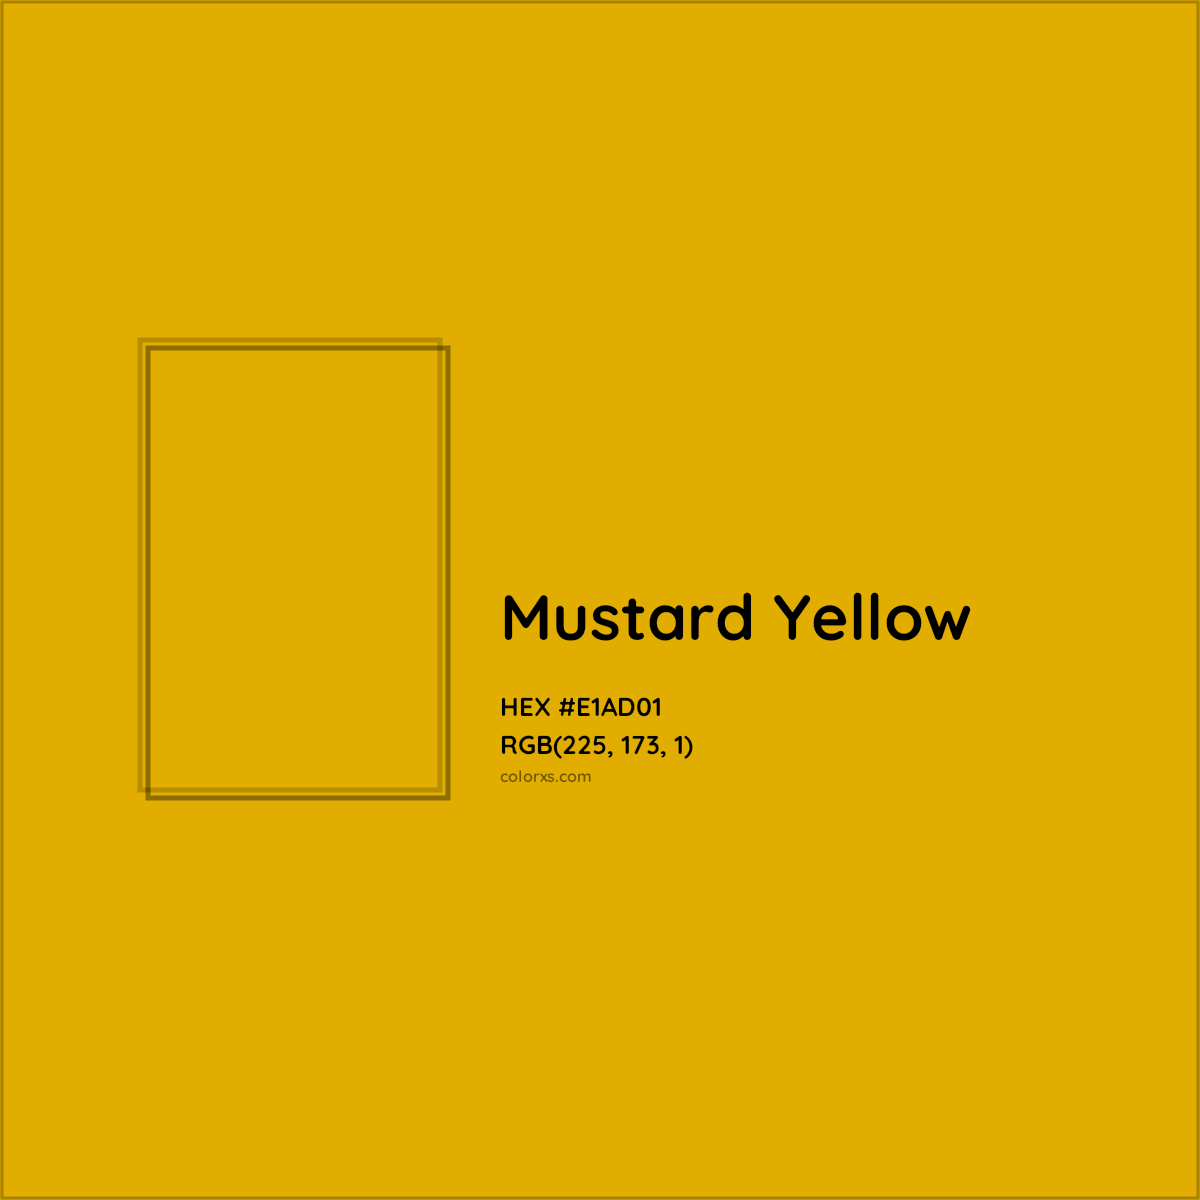 About Mustard Yellow - Color codes, similar colors and paints 